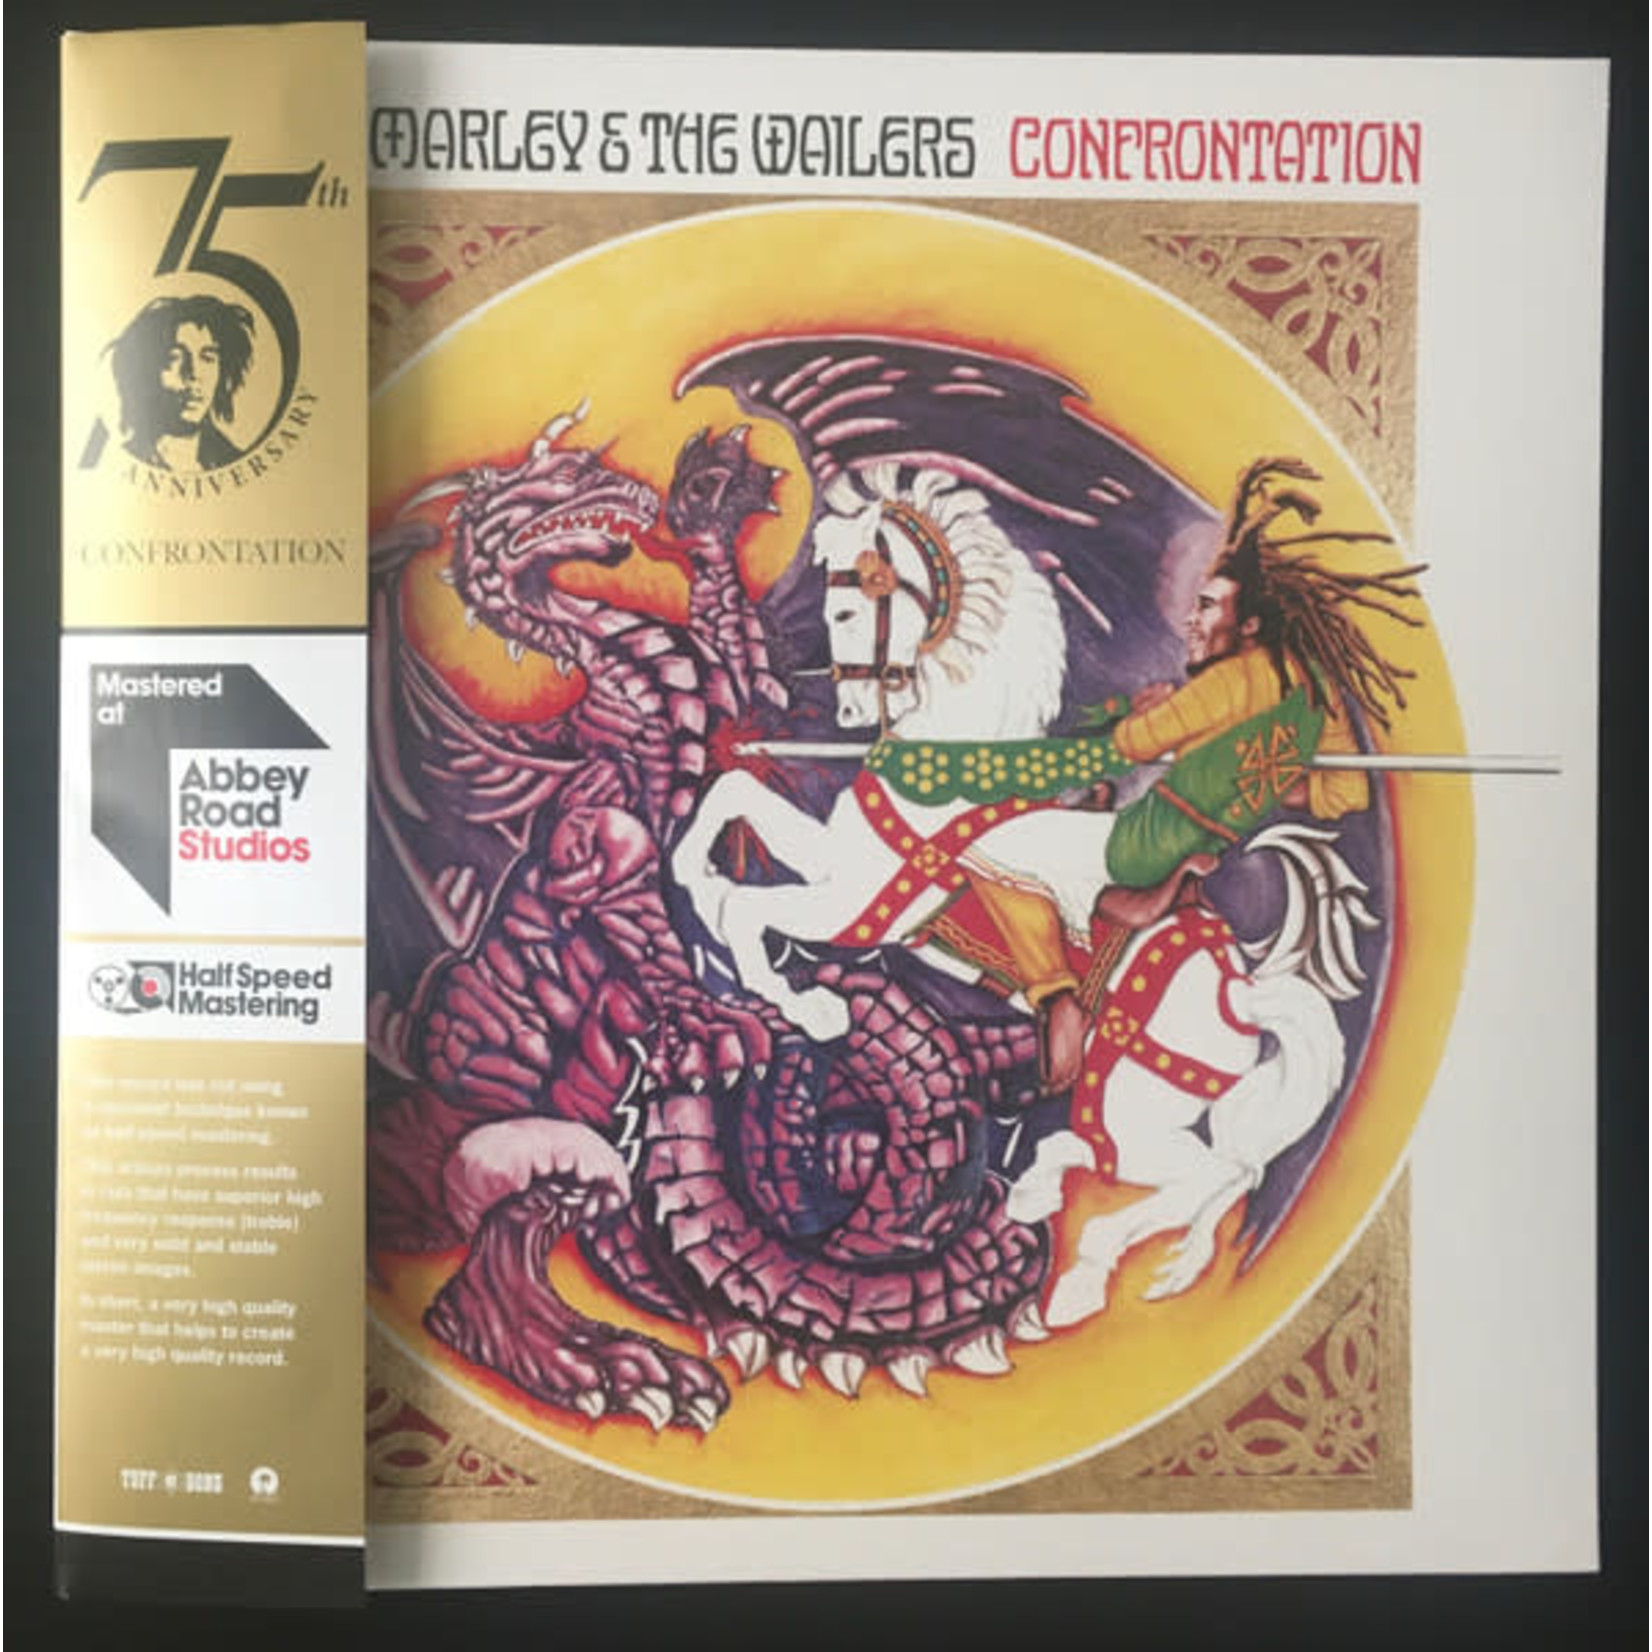 [Discontinued] Bob Marley & the Wailers - Confrontation (half speed master)